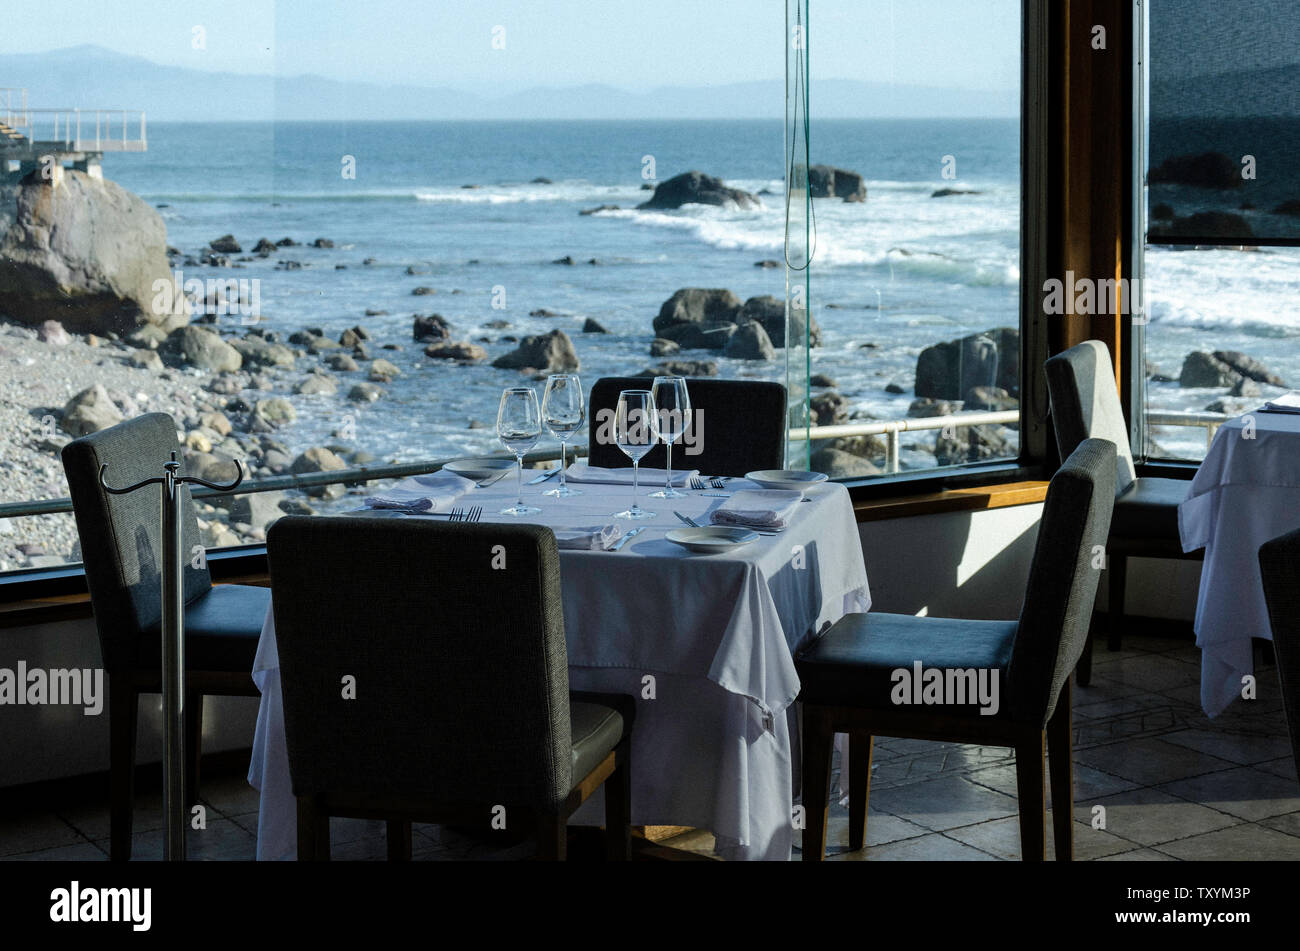 Restaurant with beach view Stock Photo